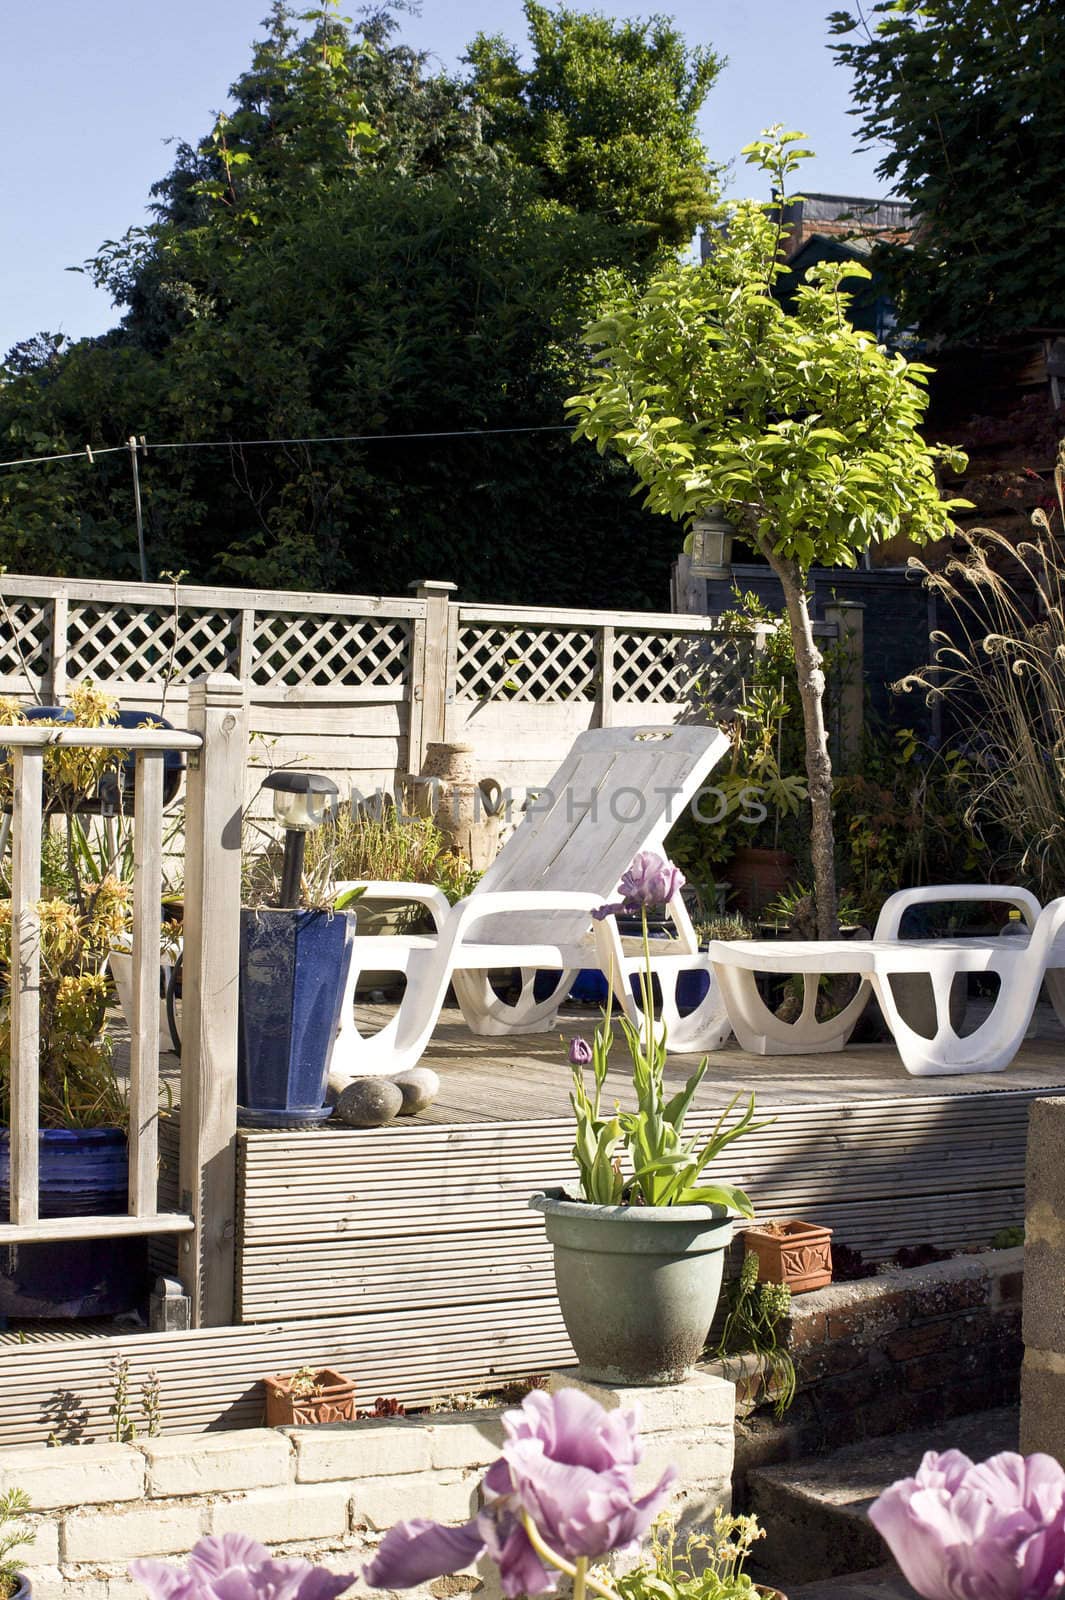 A small city garden setting with wooden constructed decking. Sun loungers rest on top of the decking surrounded by various ceramic plant containers, vegetation, flowers and plants.